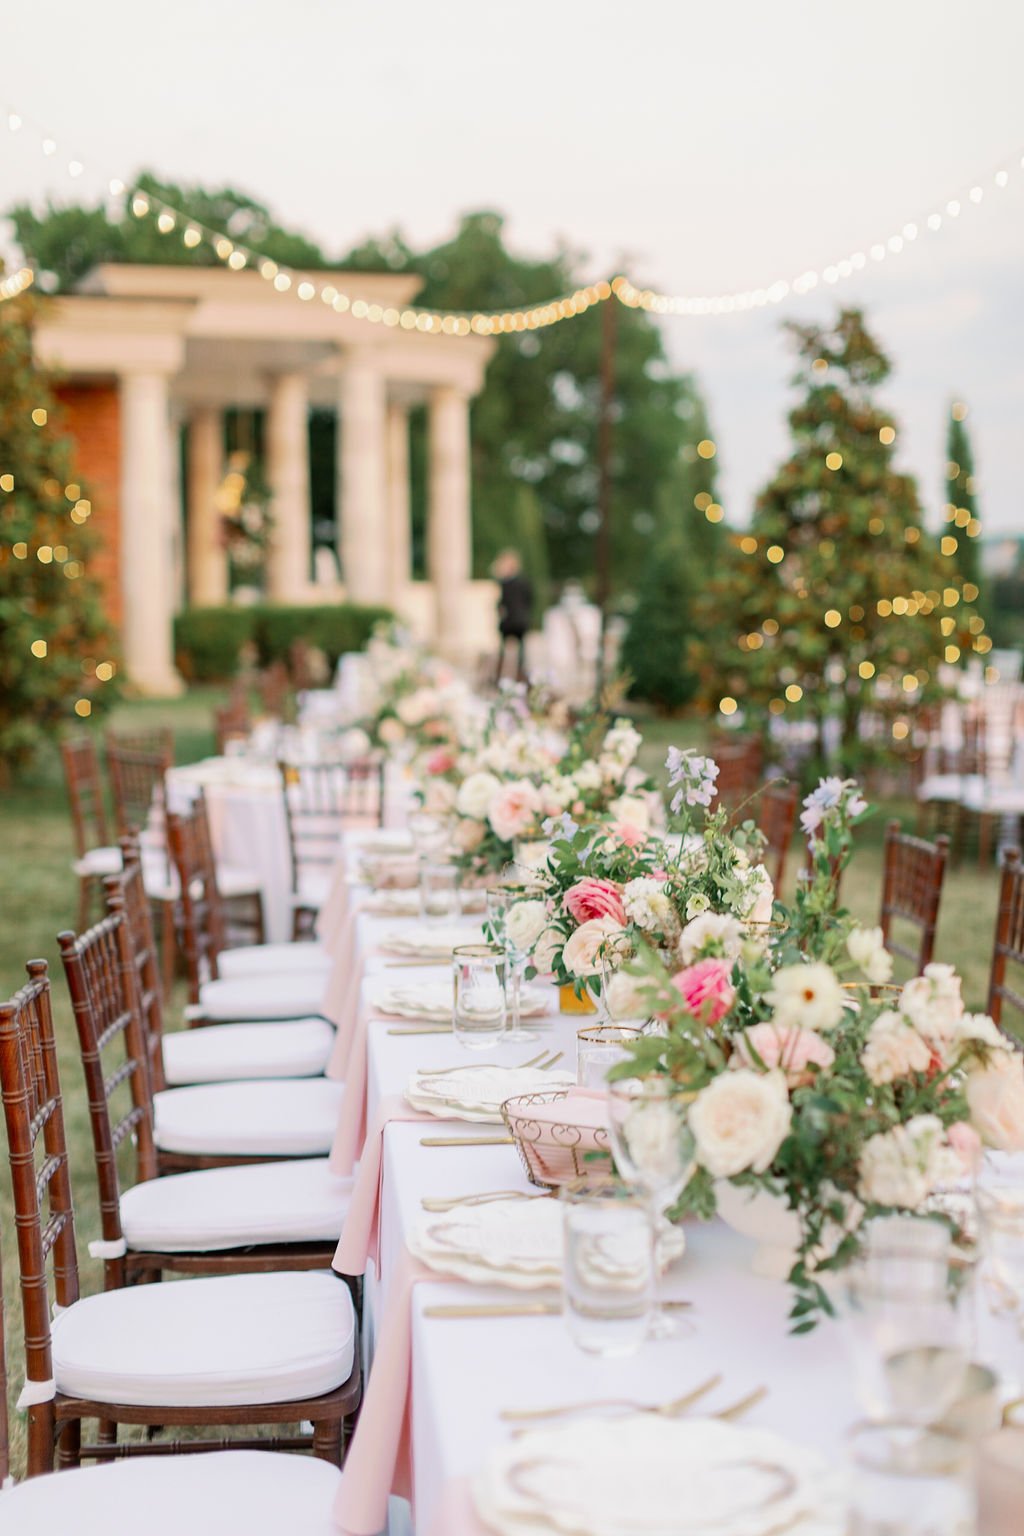 This garden-inspired reception features floral hues of blush, ivory, cream, pink, and hints of French blue along with centerpieces of pink roses, peonies, garden roses, blue delphinium, ranunculus, spirea and hydrangea. Designed by Rosemary & Finch i